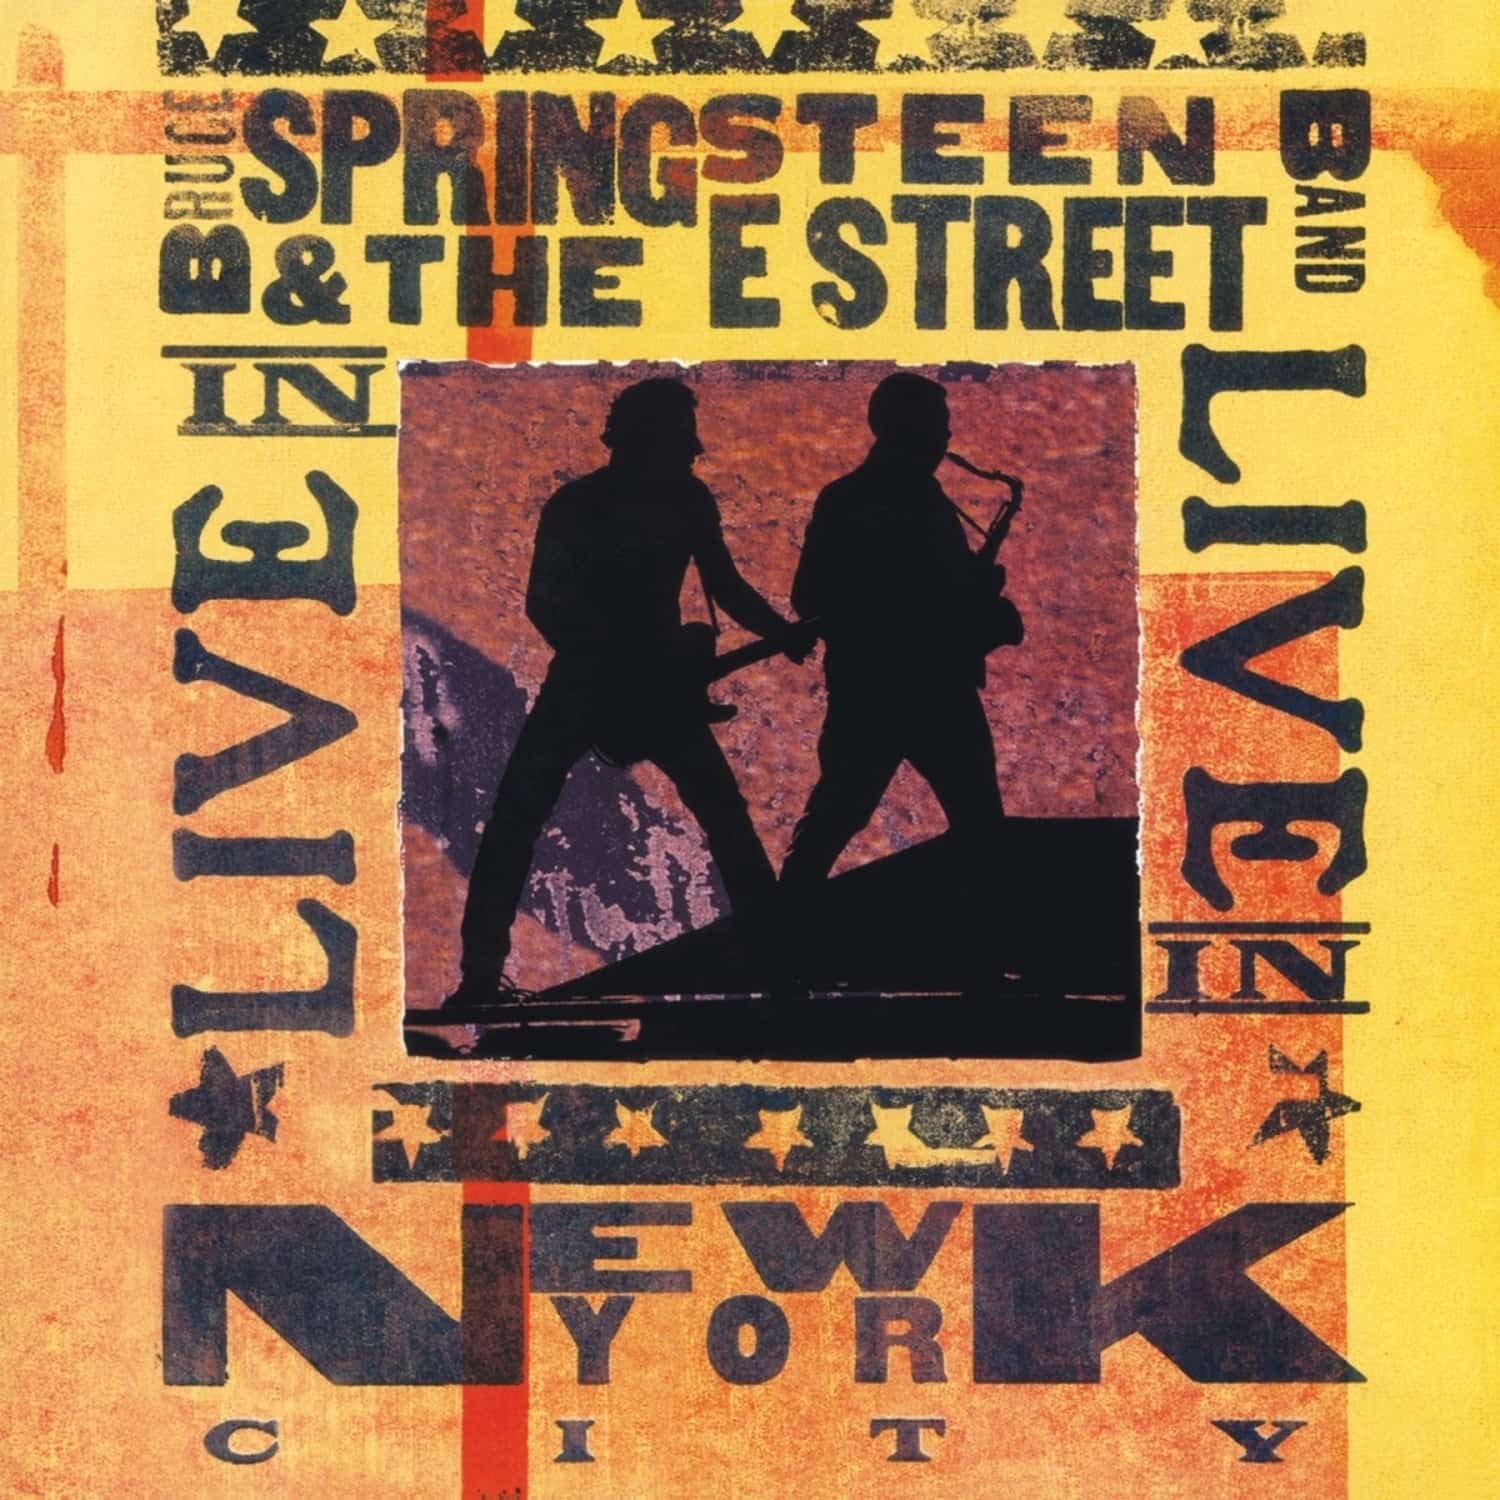 Bruce Springsteen & The E Street Band - LIVE IN NEW YORK CITY 